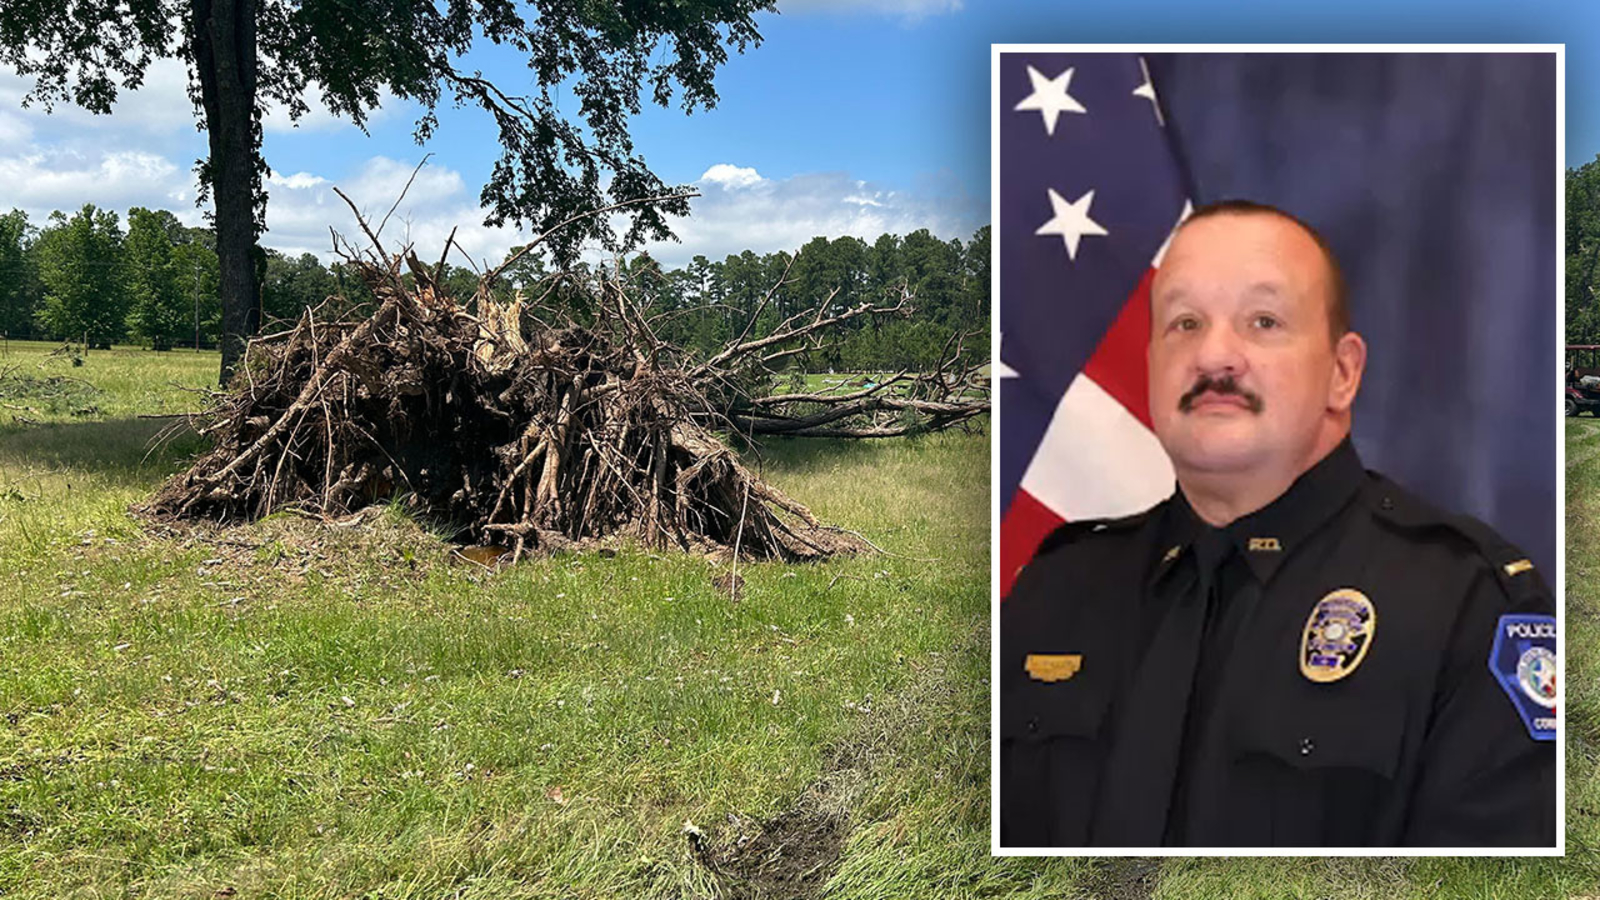 Texas officer dies: Conroe PD Lt. Jimmy Waller succumbs to injuries sustained days earlier during Trinity Co. severe weather [Video]